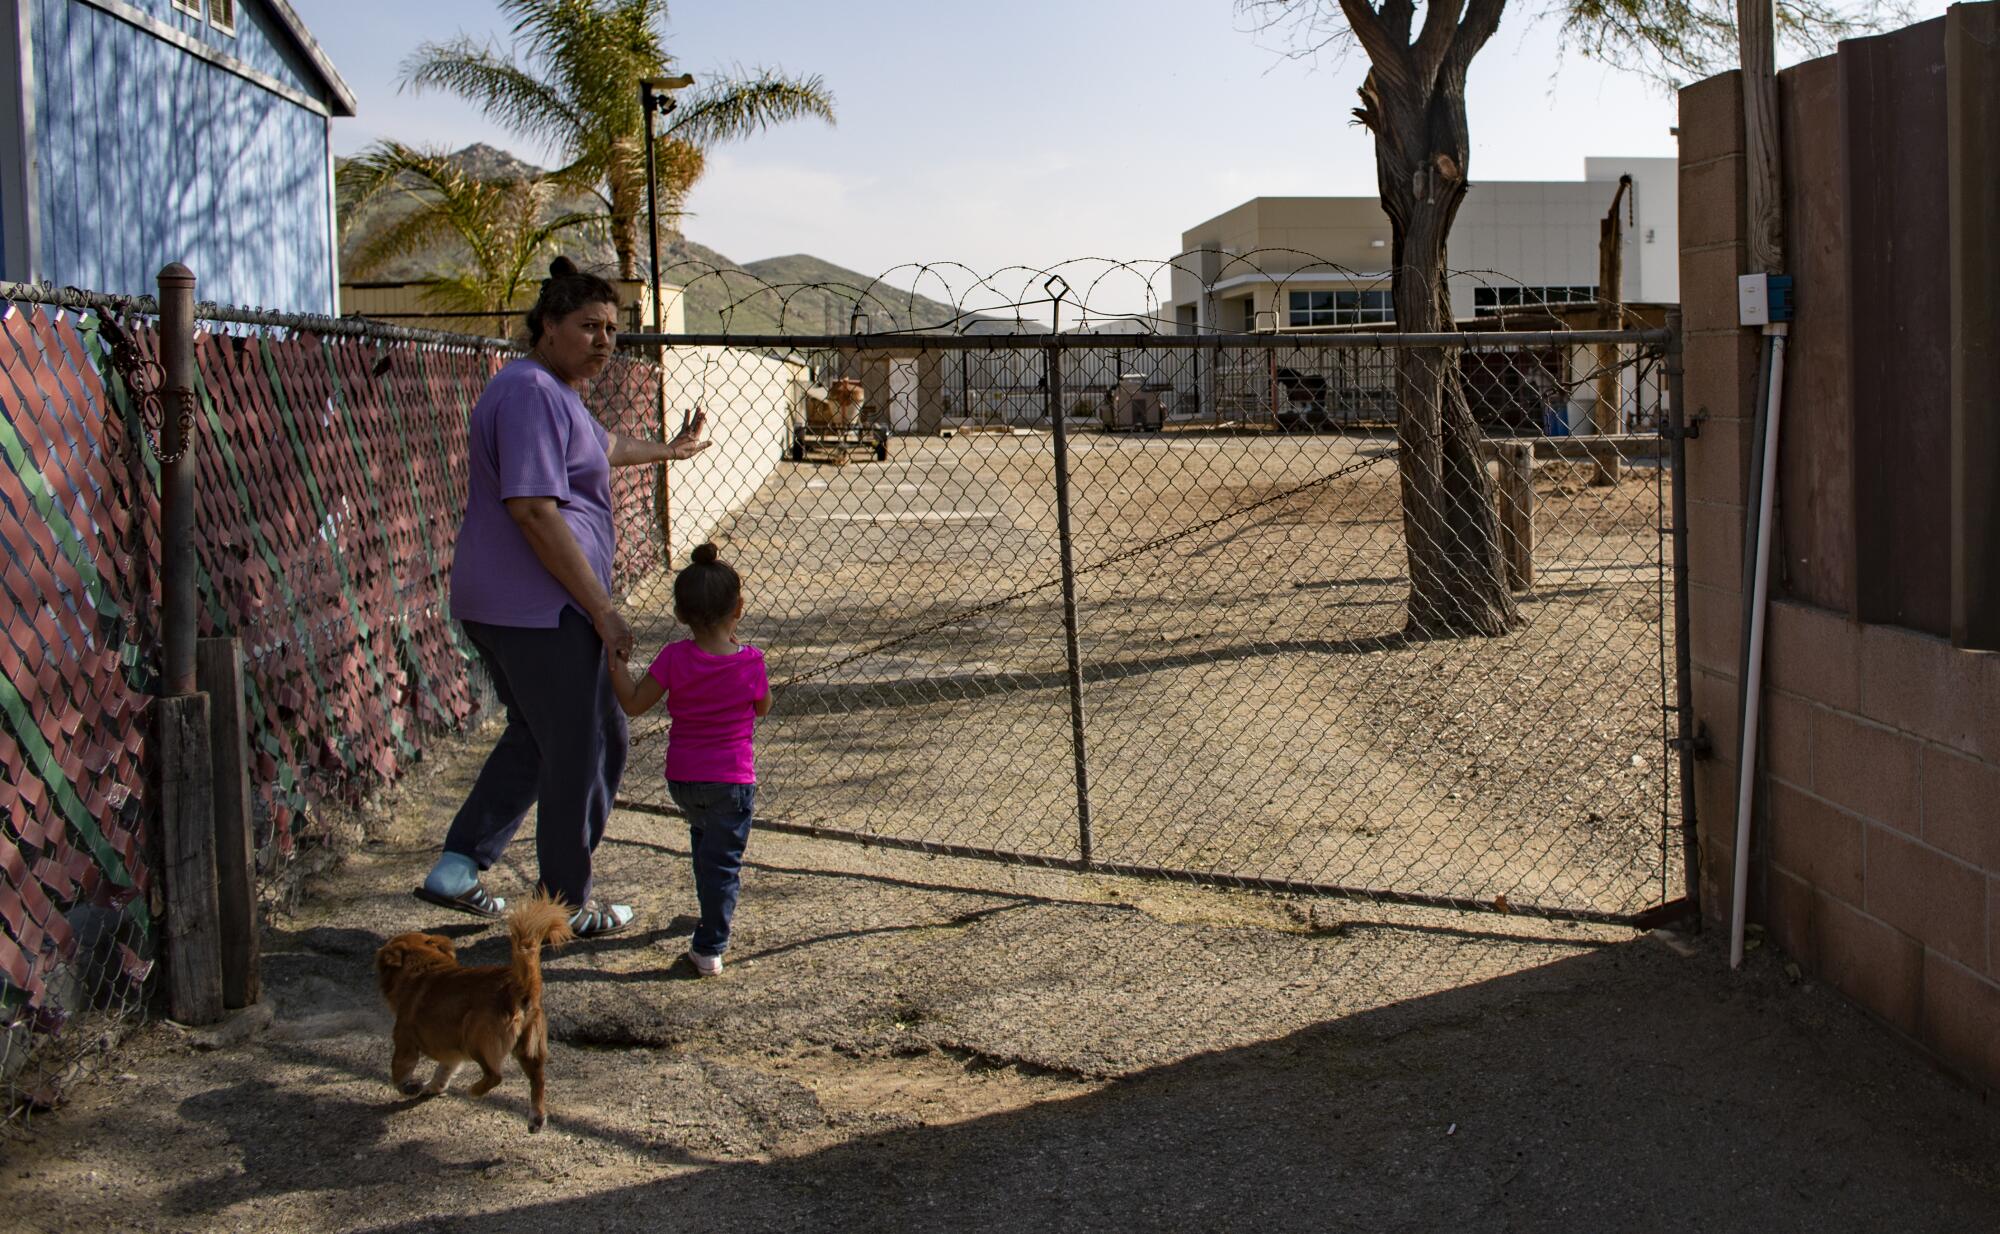 Jovita Diaz and 3-year-old Arianna head to the backyard, which has a view of a warehouse